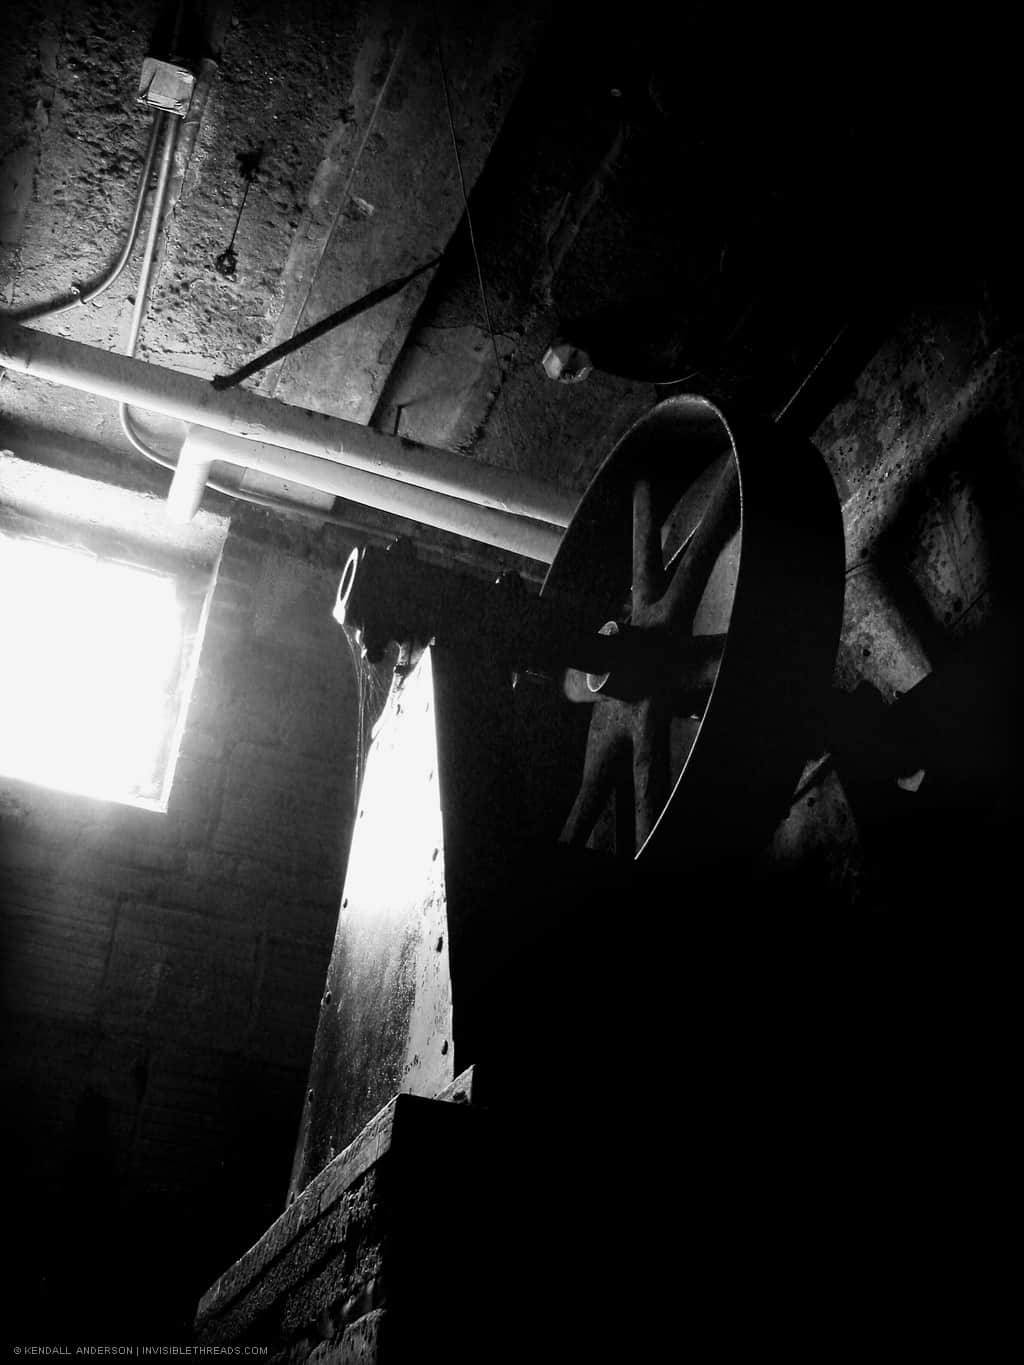 A large metal wheel is attached to some mechanical equipment in a dark basement room.